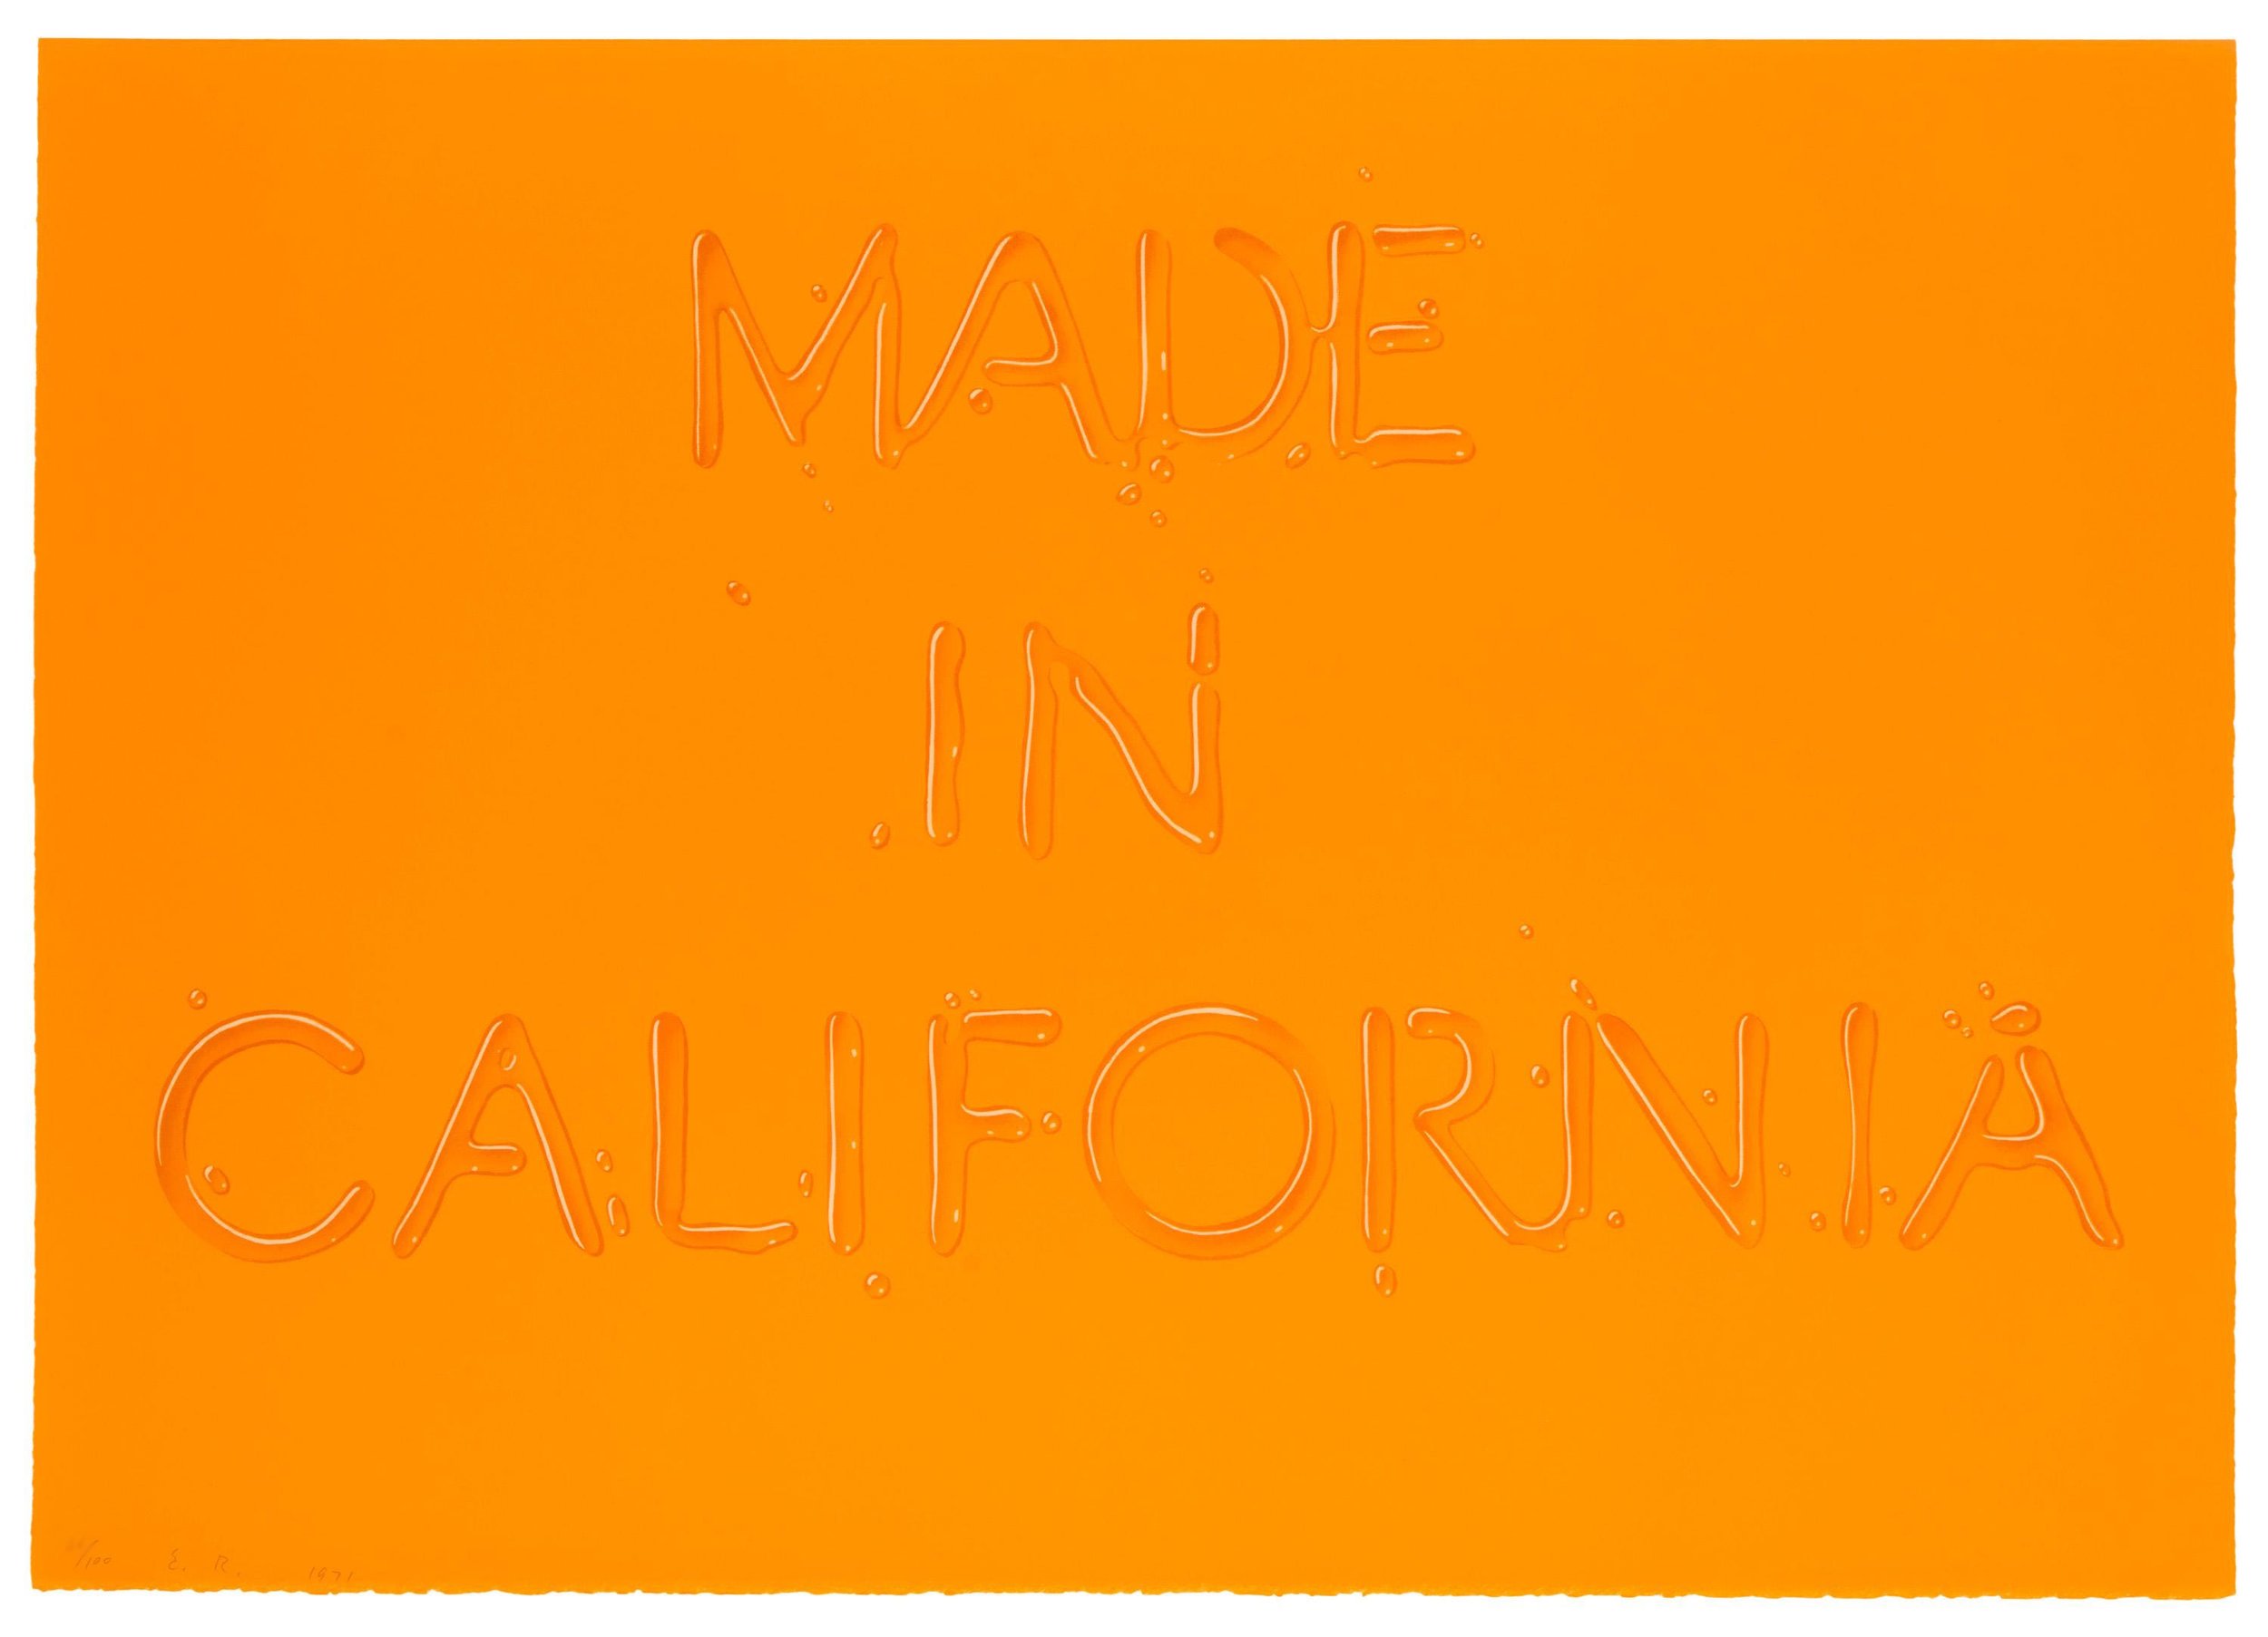  Ed Ruscha  (Born 1937)  Made in California, 1971  Lithograph  From the numbered edition of 100  Initialed, dated and numbered in pencil on recto  Published by Grunewald Graphic Arts Foundation, University of California, Los Angeles; Printed by Cirru